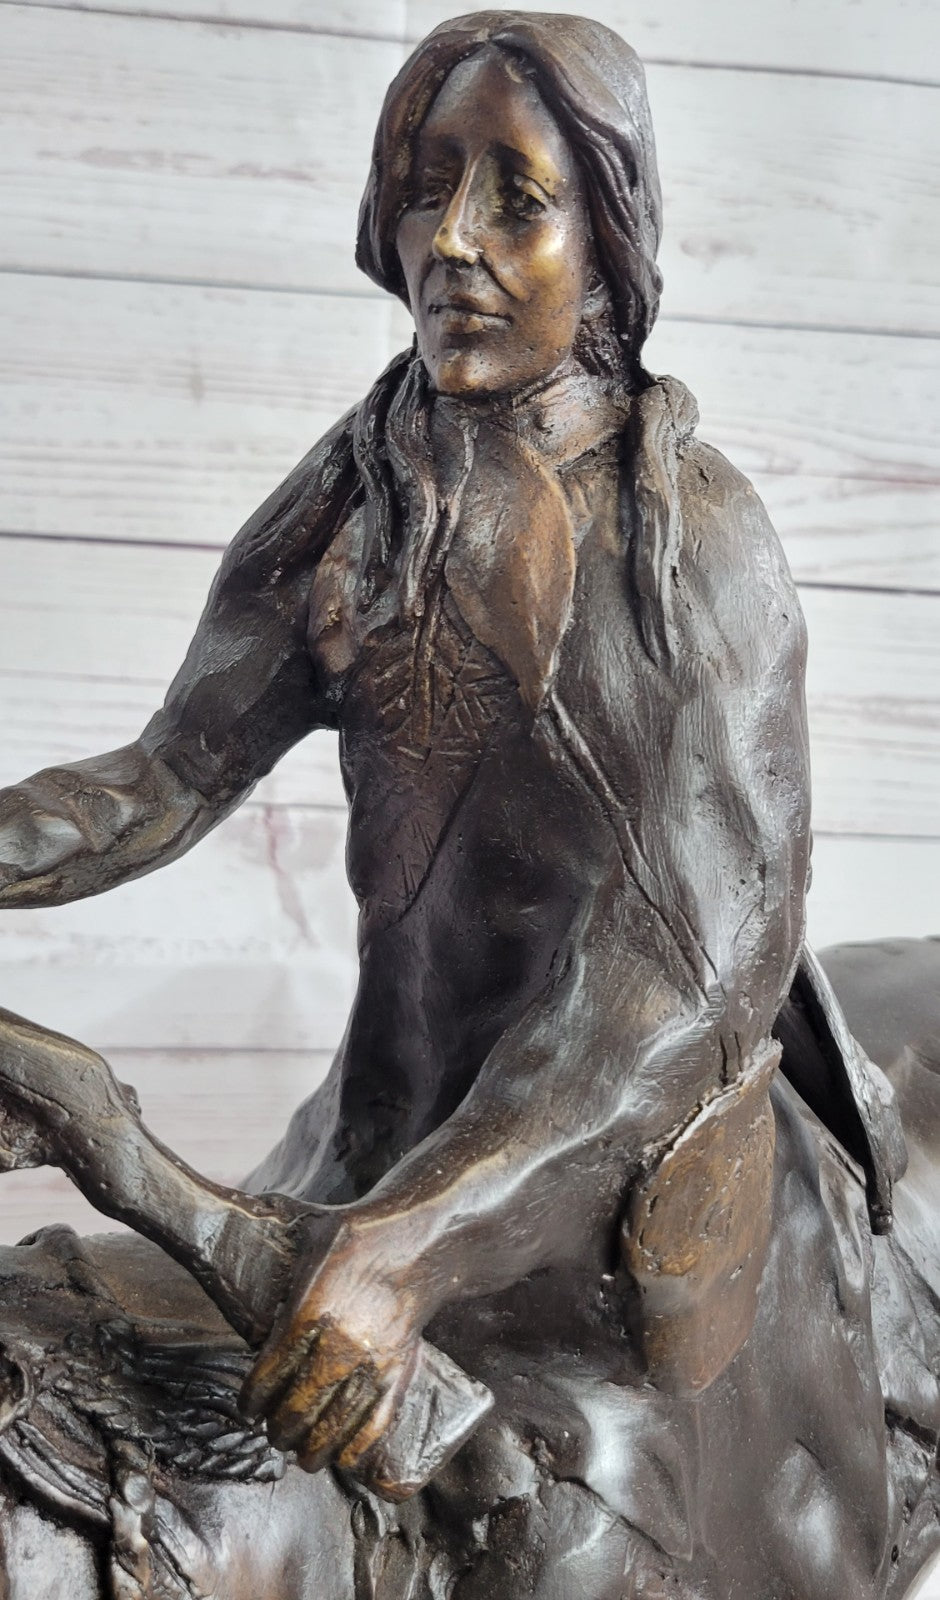 Bronze Casting Using The Lost Wax Process, "THE PEACE" by J.E. Fraser Sculpture